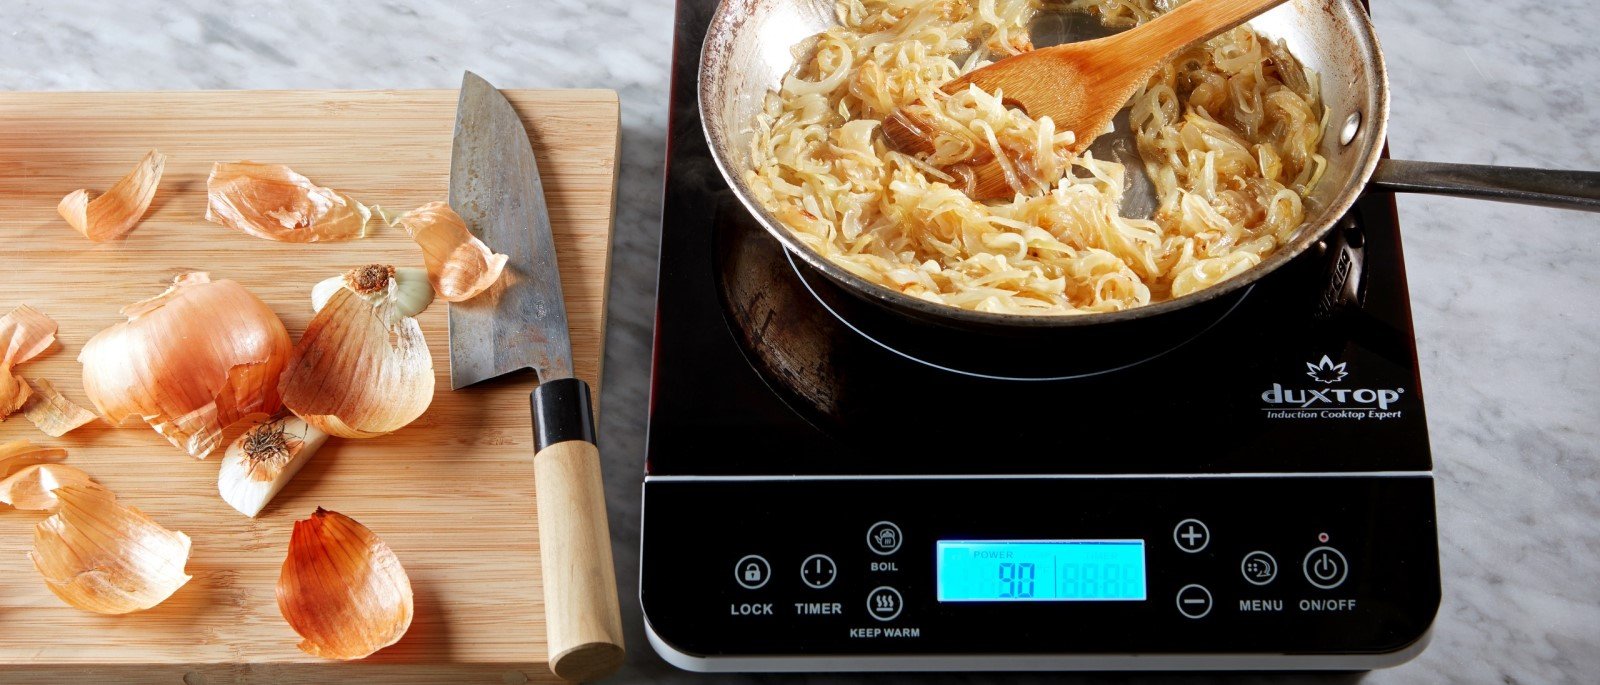 Portable Induction Cooktop Include 6 Quarts Cooking Pot with Divider, Dual Hot Pot Made of 304 Stainless Steel, with Electric Countertop Burner